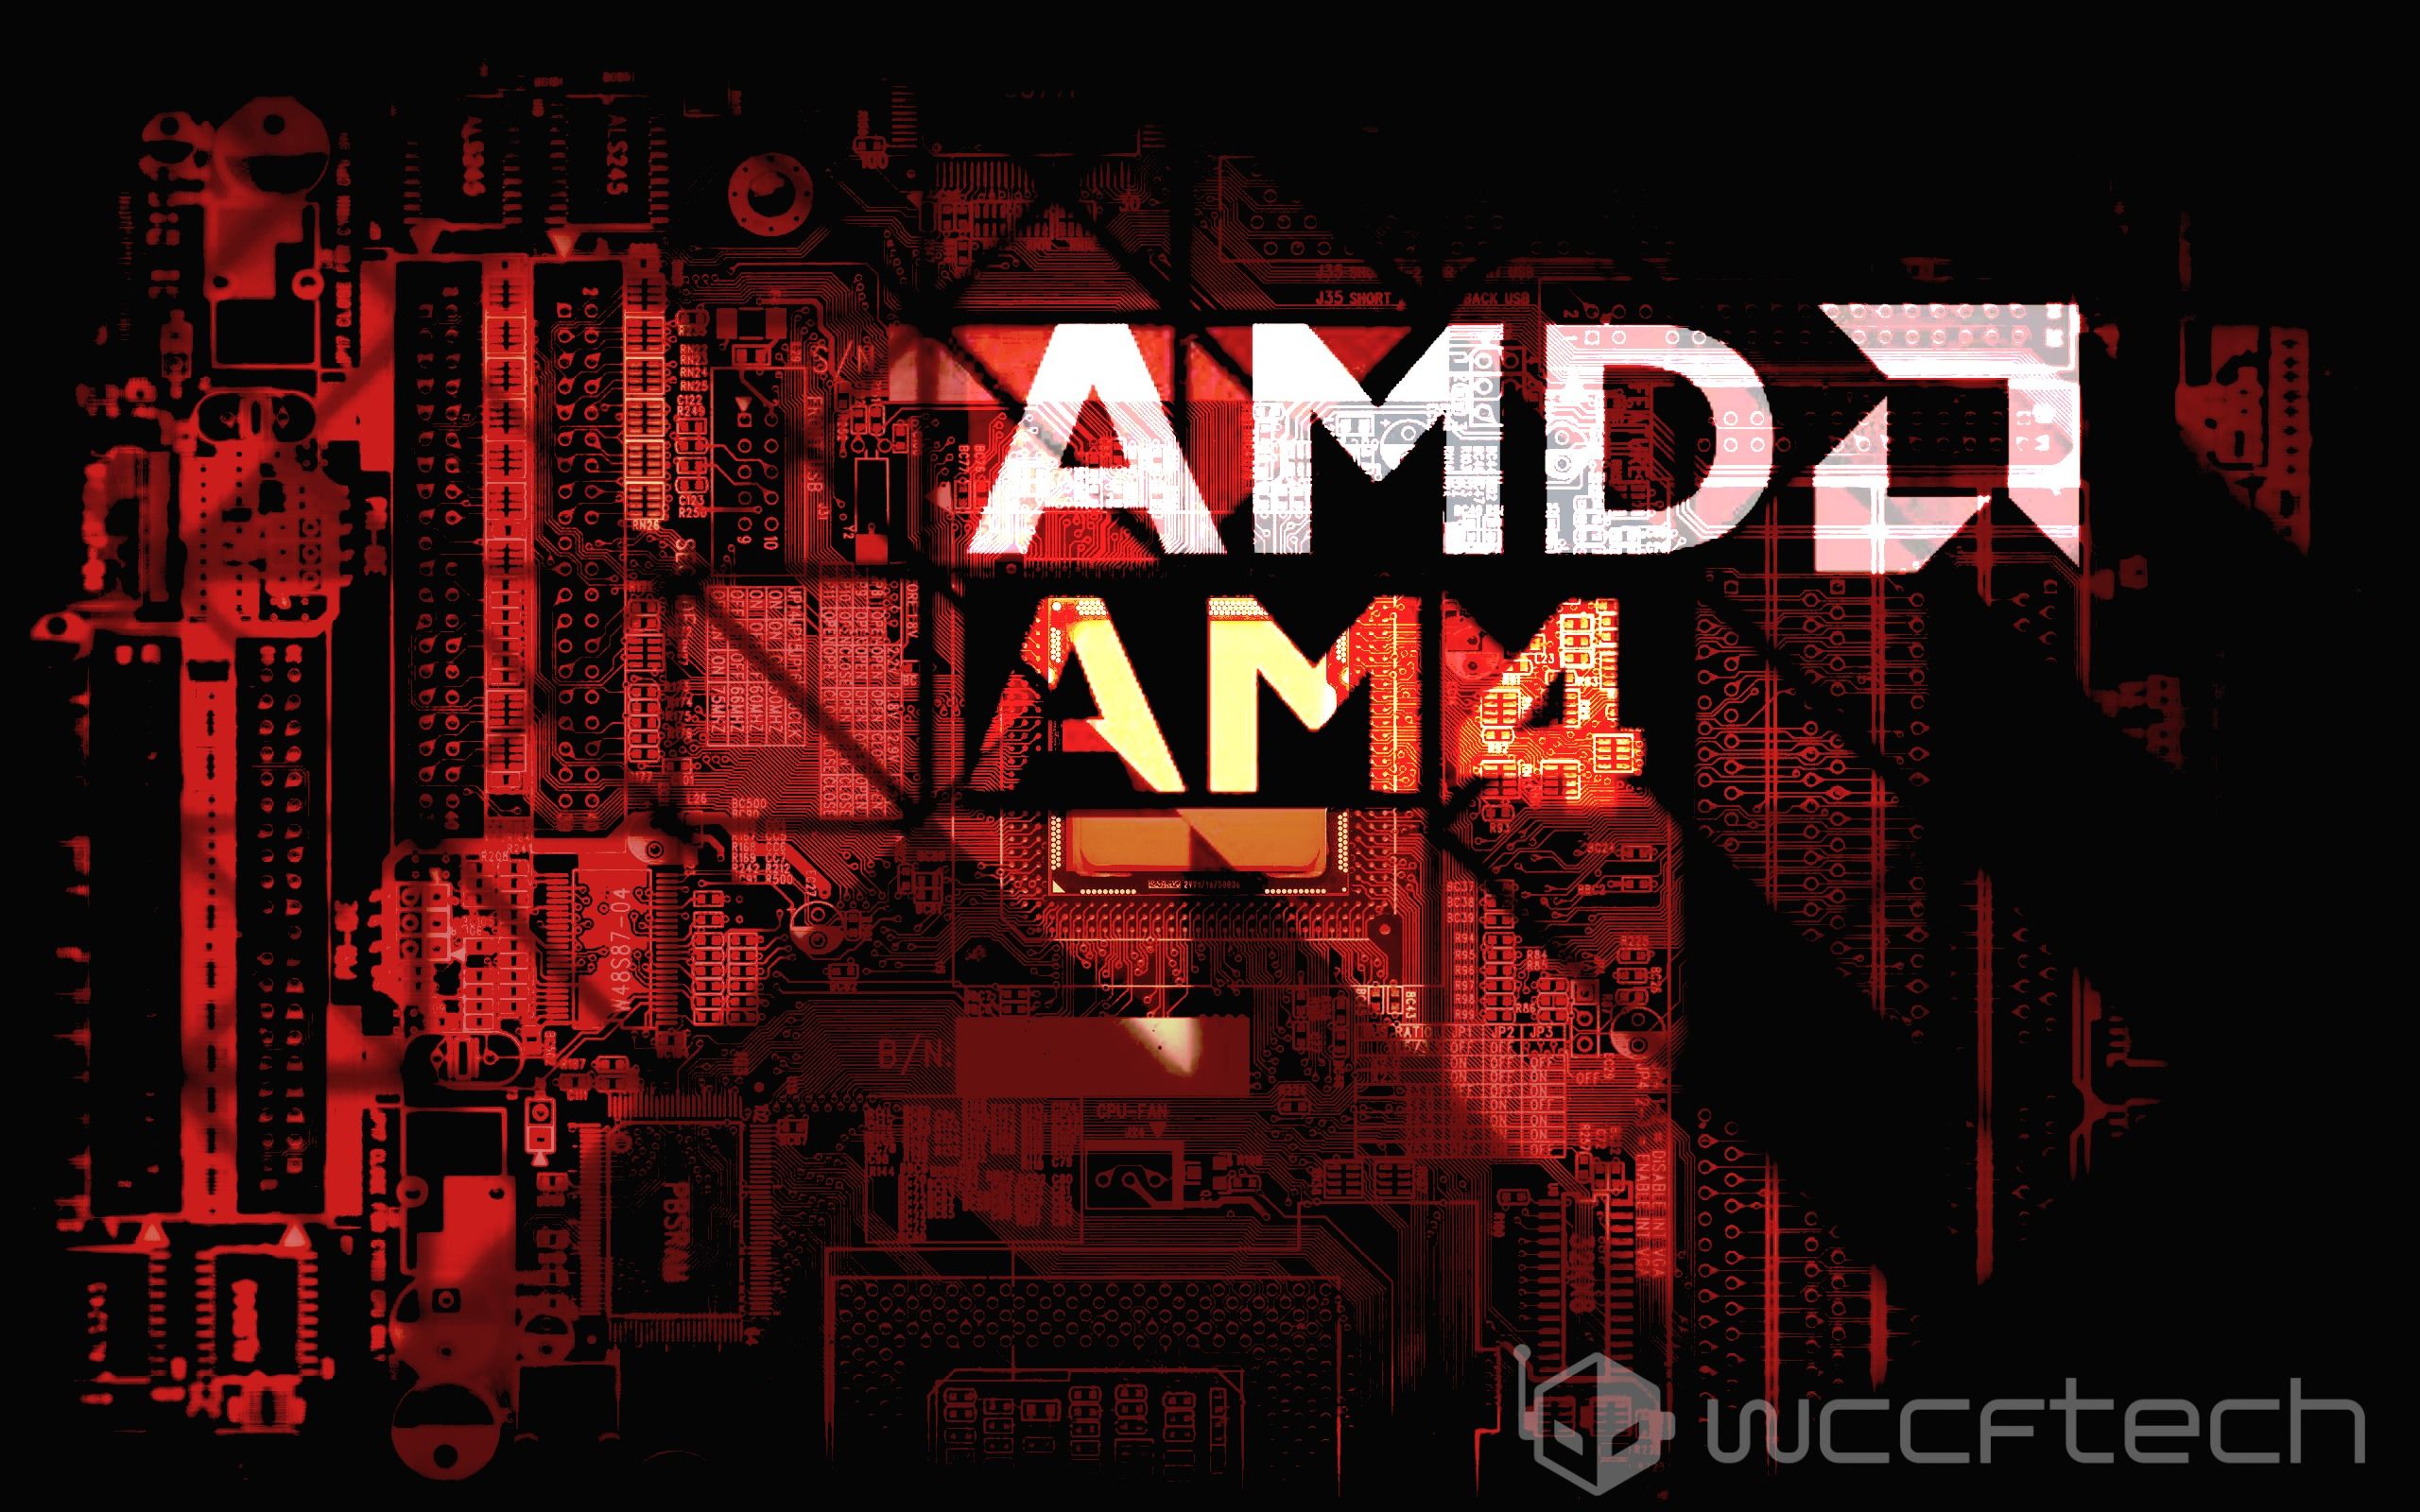 AMD Ryzen X370 & B350 ASUS Motherboards Leaked February 24th